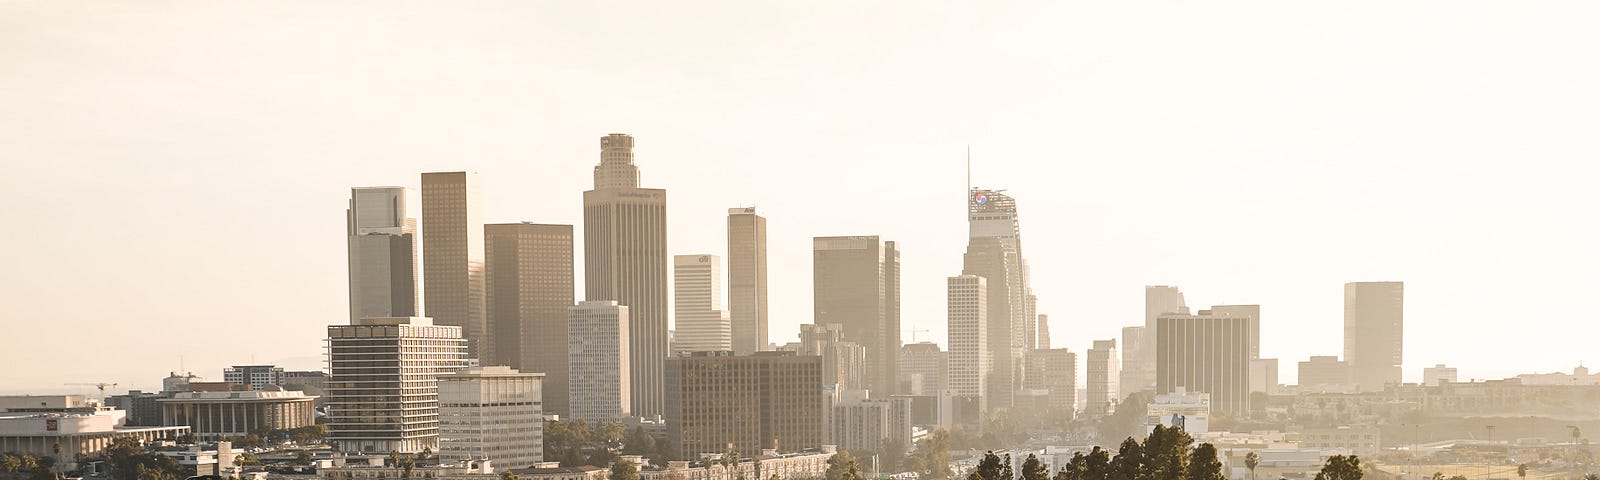 Picture of LA skyline in background and a neighborhood in the foregroundd